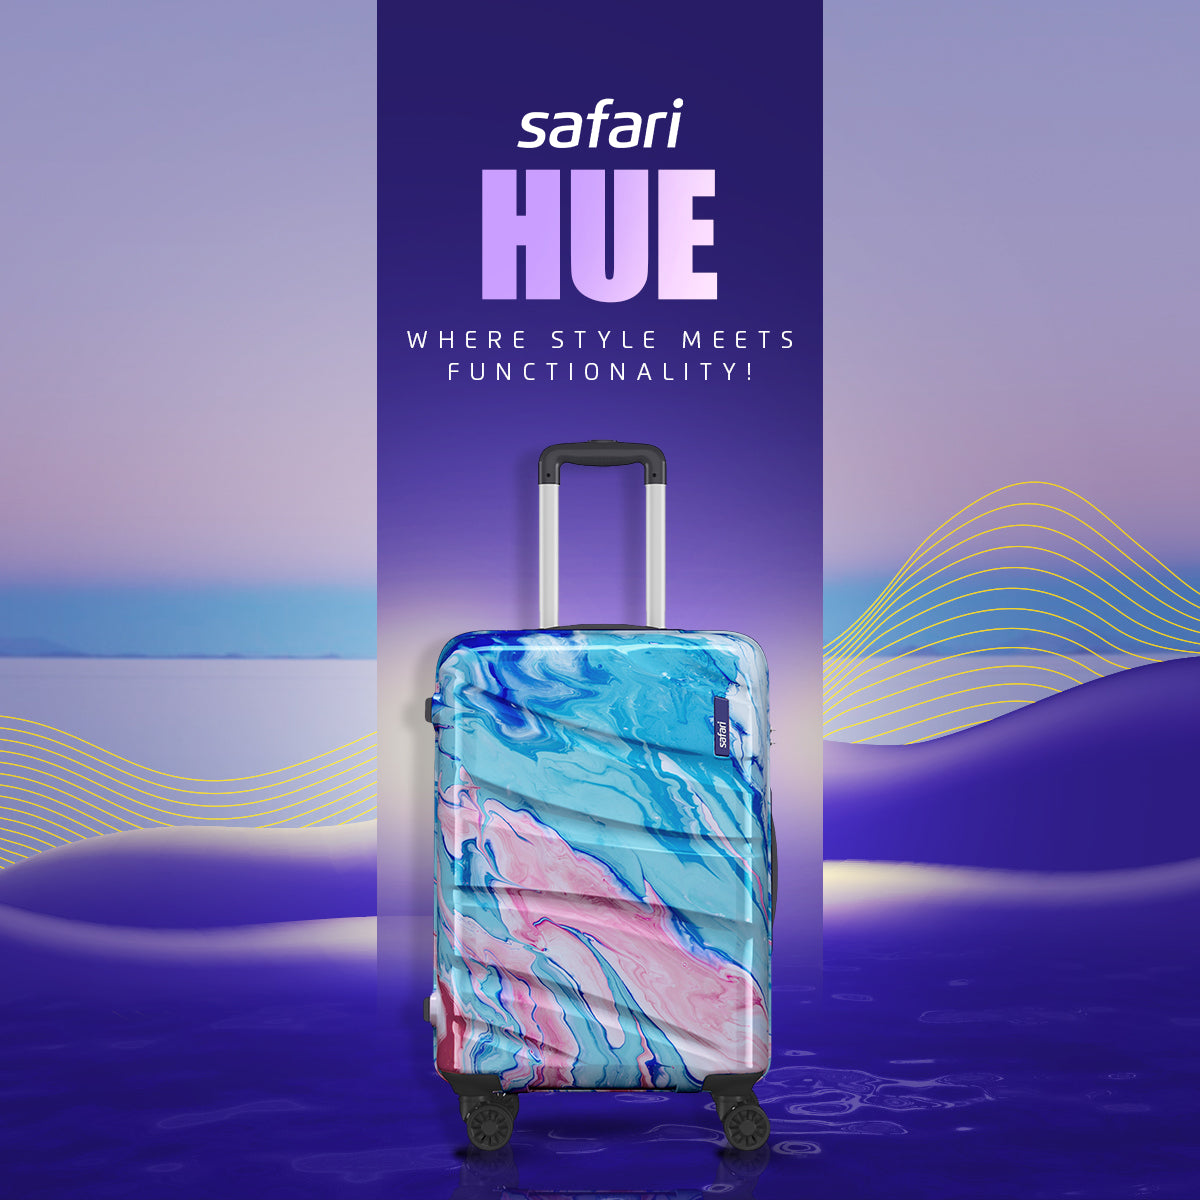 Buy Safari Hue 8 Wheels 55 Cms Small Cabin Trolley Bag Hard Case  Polycarbonate 360 Degree Wheeling System Luggage, Trolley Bags for Travel,  Suitcase for Travel, Multicolour at